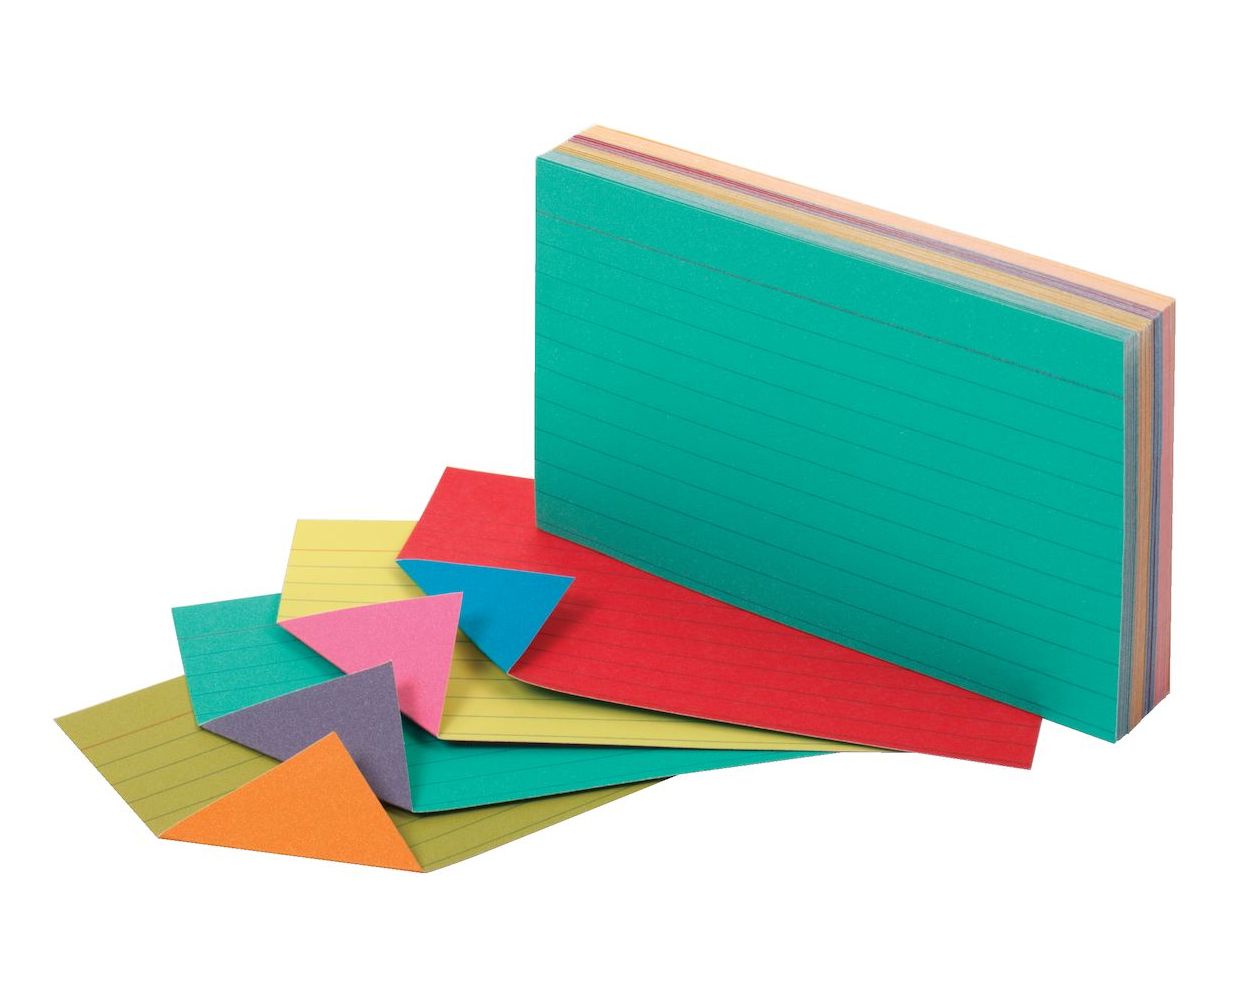 Tops 3X5 Ruled Index Cards (Multi Color)